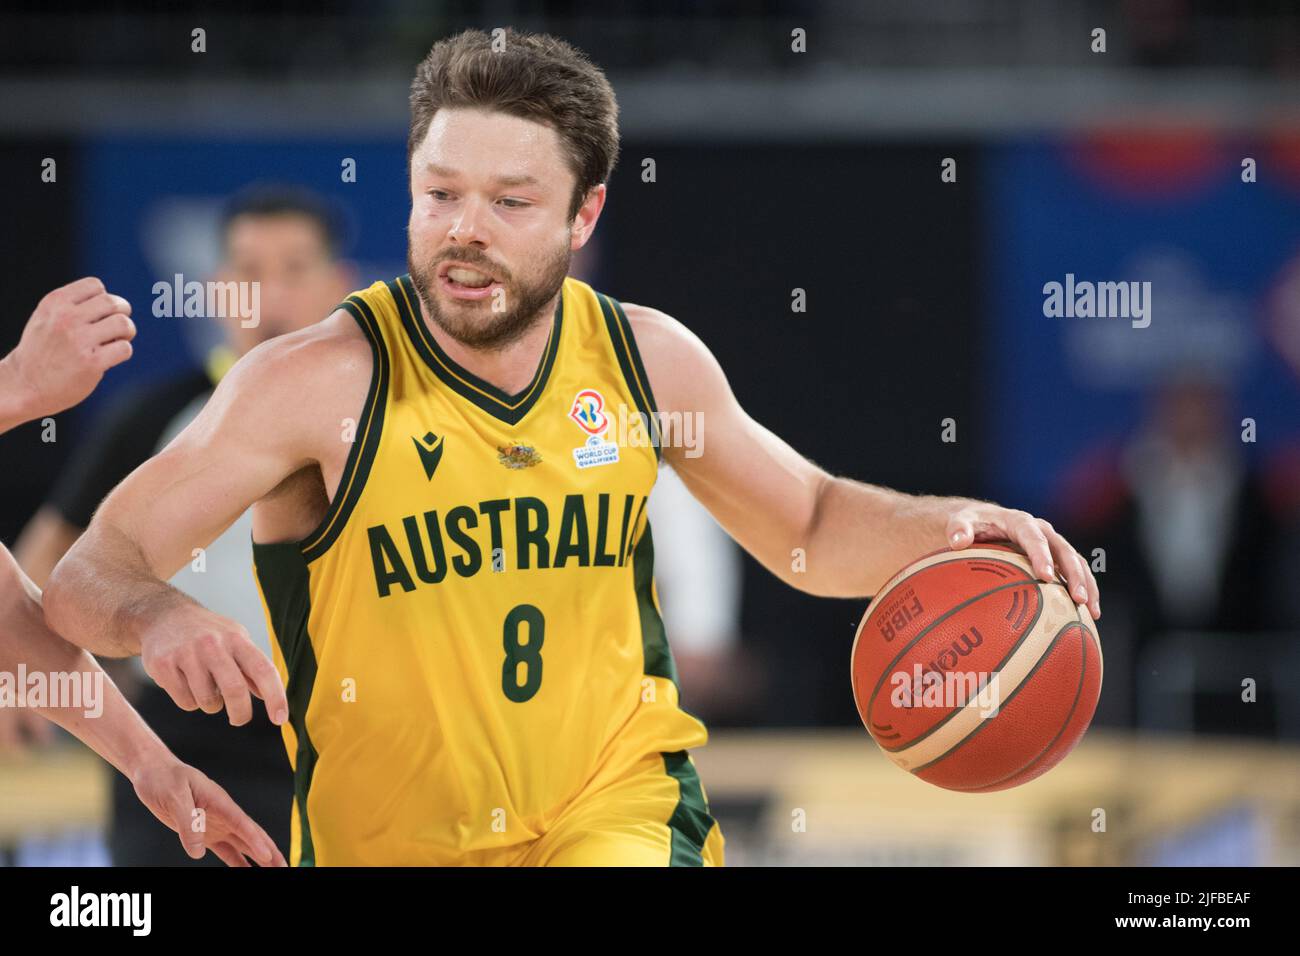 Melbourne, Australia. 01st July, 2022. Matthew Dellavedova of Australia  Basketball team in action during the FIBA World Cup 2023 Qualifiers Group B  Window 3 game between Australia and Japan held at John